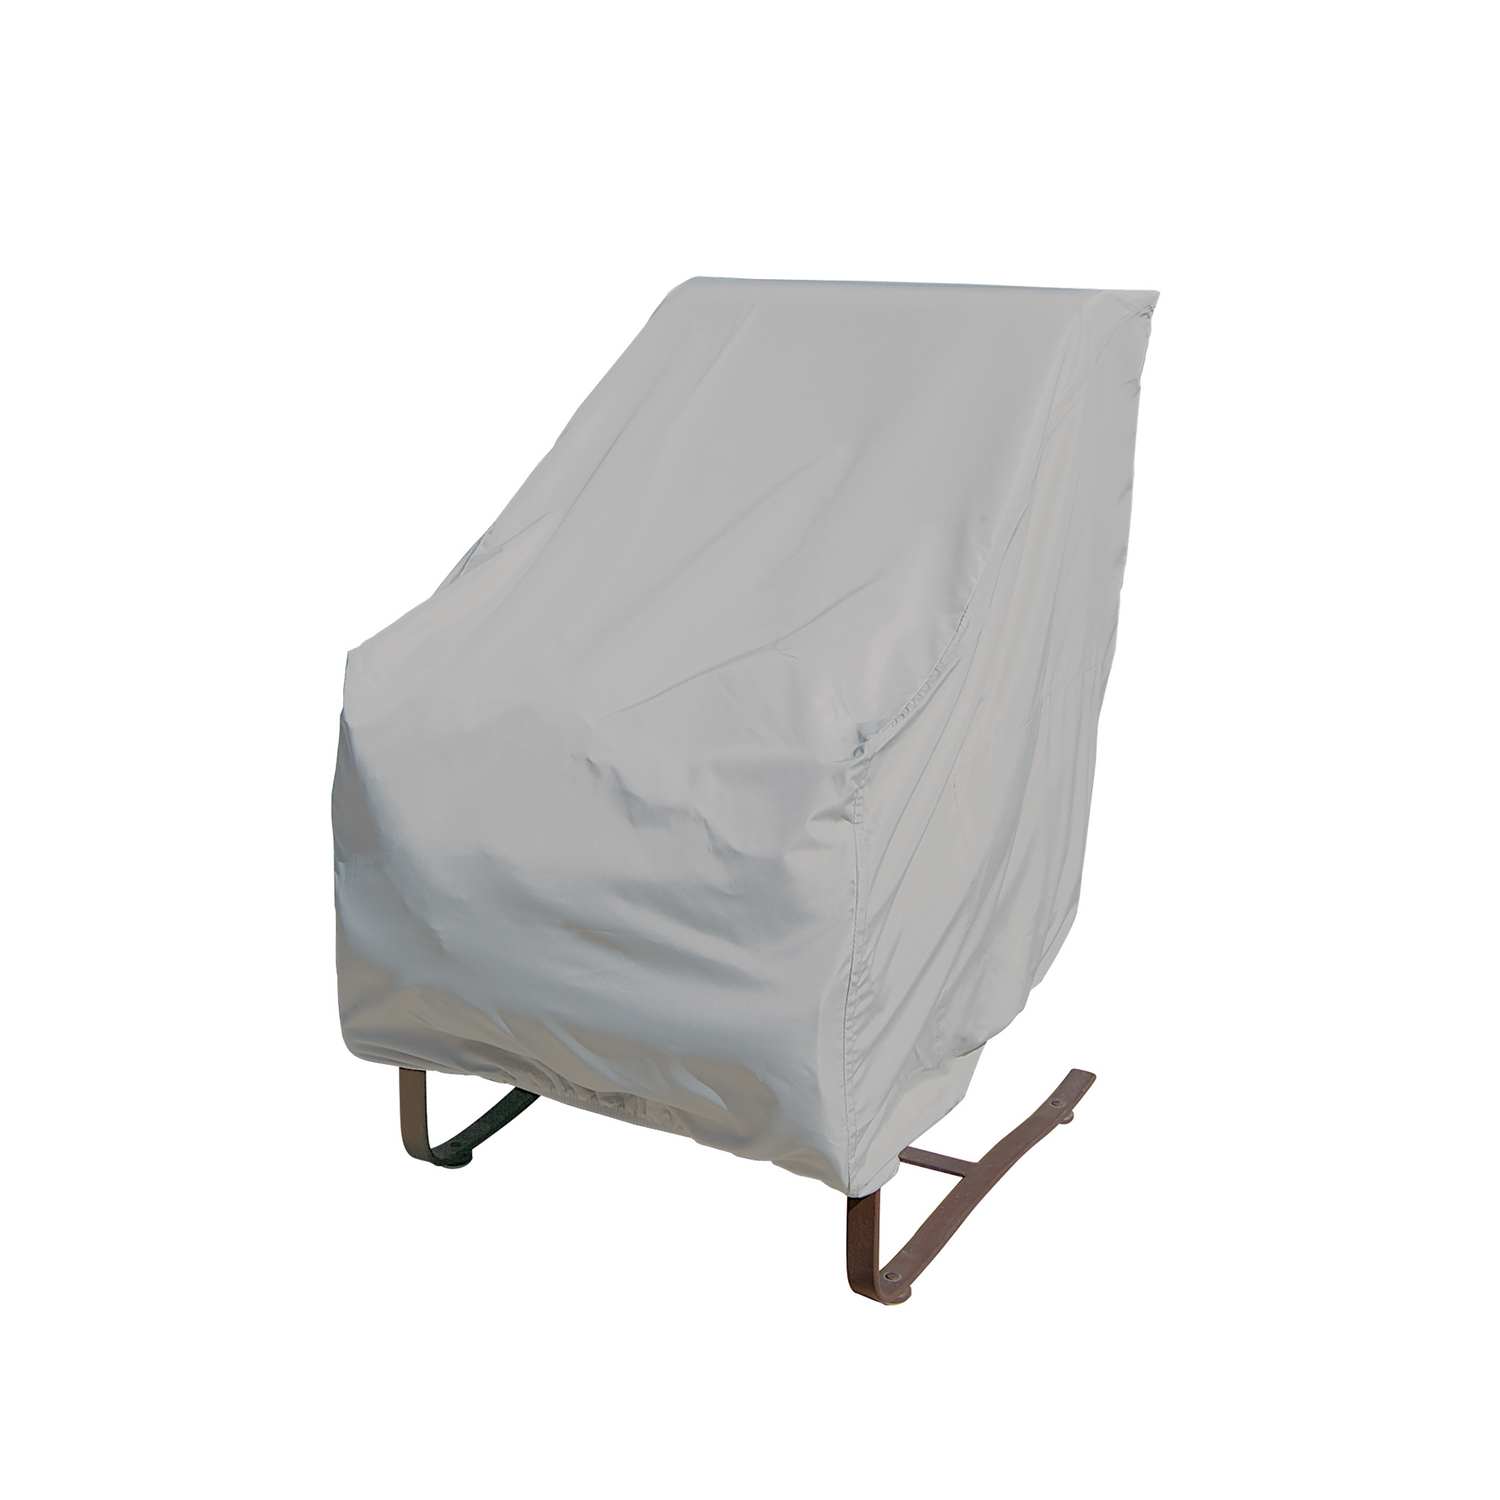 Patio Furniture Covers Category